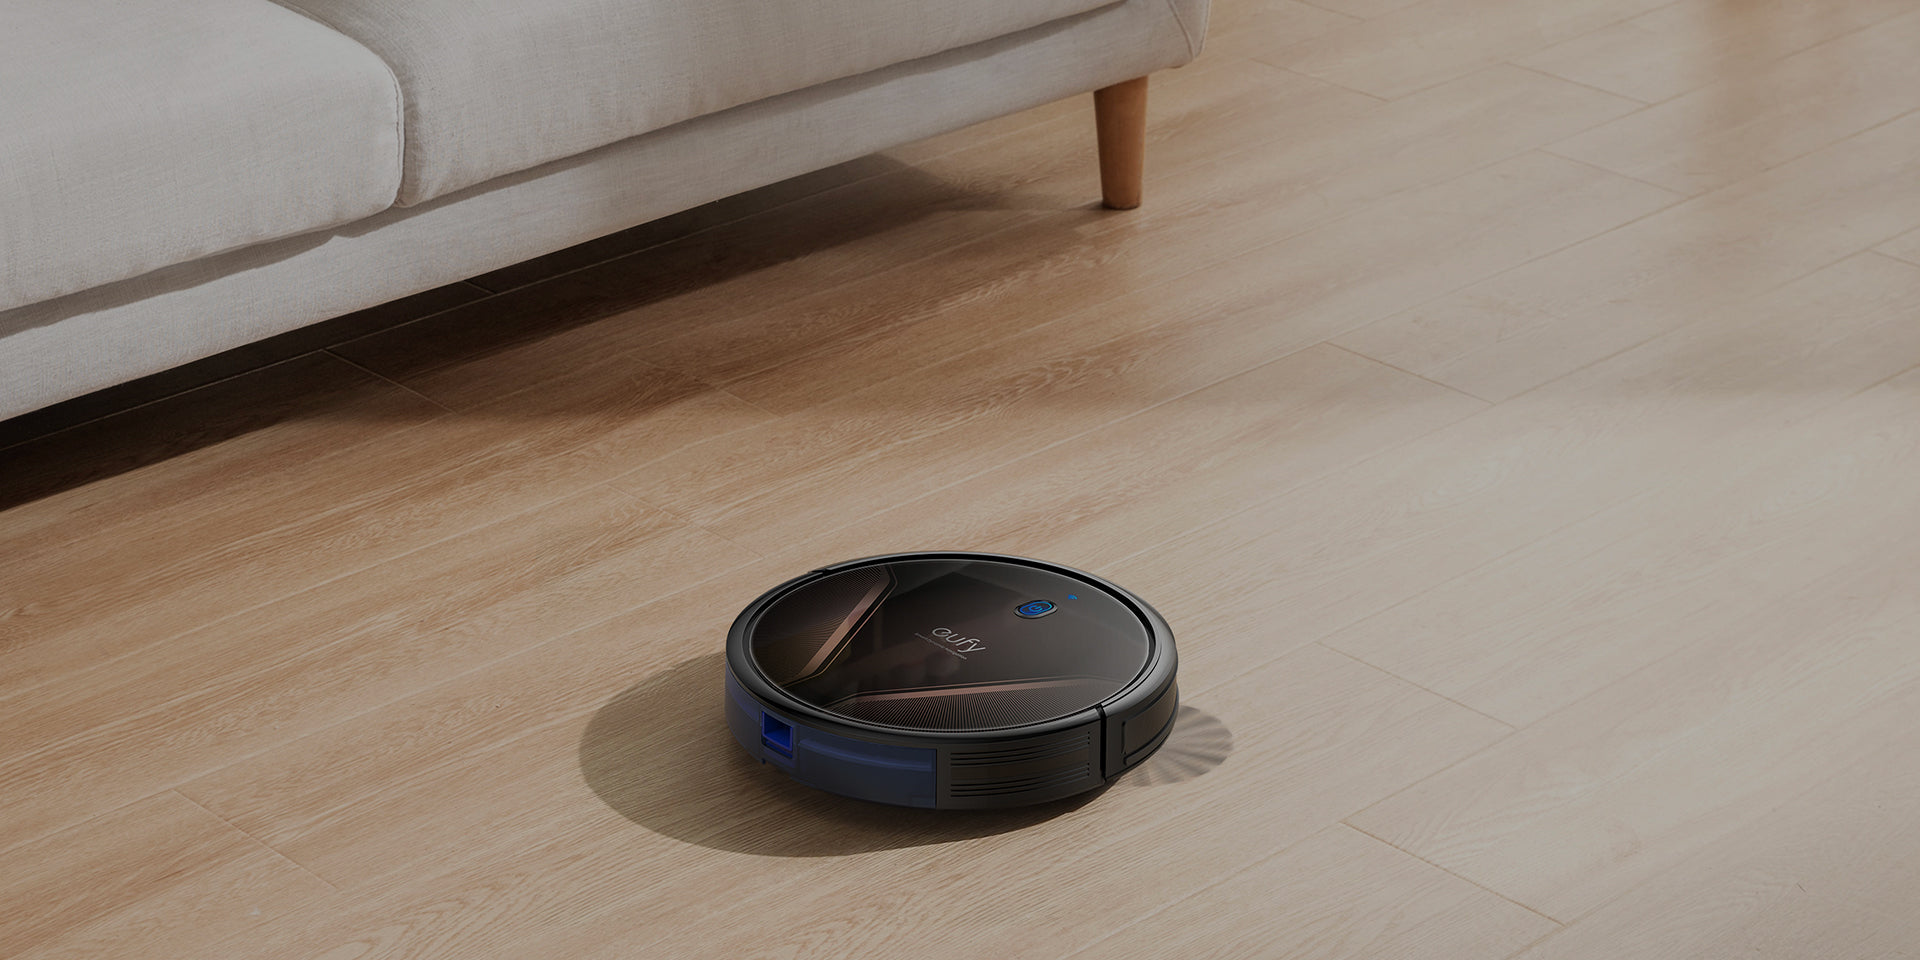 2258 Pc Eufy &Lt;H1&Gt;Eufy Robovac G20 Hybrid Robotic Vacuum Cleaner&Lt;/H1&Gt; Https://Www.youtube.com/Watch?V=Tobyebu1K4G &Lt;Ul&Gt; &Lt;Li&Gt; &Lt;Div Data-Line-Index=&Quot;0&Quot; Data-Zone-Id=&Quot;0&Quot;&Gt;&Lt;B&Gt;Rated 4-Stars By Techradar In 2022&Lt;/B&Gt;&Lt;/Div&Gt;&Lt;/Li&Gt; &Lt;Li&Gt;&Lt;B&Gt;2-In-1 Vacuum And Mop&Lt;/B&Gt;: Mop And Vacuum Your Home At The Same Time For A Complete Clean. Robovac G20 Hybrid Leaves Nothing Behind Except Spotless Floors.&Lt;/Li&Gt; &Lt;Li&Gt; &Lt;Div Data-Line-Index=&Quot;0&Quot; Data-Zone-Id=&Quot;0&Quot;&Gt;&Lt;Strong&Gt;Efficient Cleaning&Lt;/Strong&Gt; : Using Smart Dynamic Navigation, Robovac G20 Hybrid Cleans In A Z-Shaped Path For Fewer Missed Areas And More Efficiency Than Random-Path Robotic Vacuums.&Lt;/Div&Gt; &Lt;Div Data-Line-Index=&Quot;3&Quot; Data-Zone-Id=&Quot;0&Quot;&Gt;*Compared With Robovac 10.&Lt;/Div&Gt; &Lt;Div Data-Line-Index=&Quot;4&Quot; Data-Zone-Id=&Quot;0&Quot;&Gt;*It Divides The Cleaning Area Into 13 Ft X 13 Ft (4 X 4 M) Zones And Cleans Them One By One. Ideal For Homes Around 1000 Sq. Ft. (92 M²) In Size.&Lt;/Div&Gt;&Lt;/Li&Gt; &Lt;Li&Gt; &Lt;Div Data-Line-Index=&Quot;0&Quot; Data-Zone-Id=&Quot;0&Quot;&Gt;&Lt;Strong&Gt;5× More Suction Power* &Lt;/Strong&Gt;: Choose Between 4 Suction Modes And Get Up To 2500 Pa Of Suction Power. Easily Clean Pet Hair ,Daily Messes,And More.&Lt;/Div&Gt;&Lt;/Li&Gt; &Lt;Li&Gt;&Lt;B&Gt;Powerfully Quiet&Lt;/B&Gt;: At 55 Db And No Louder Than The Hum Of A Microwave, Robovac Quietly Cleans While You Go About Your Day.&Lt;/Li&Gt; &Lt;Li&Gt;&Lt;B&Gt;Ultra-Slim Design&Lt;/B&Gt;: Being Only 2.85 Inches Tall, Robovac Easily Glides Under Hard-To-Reach Areas Like Sofas, Dressers, And Beds.&Lt;/Li&Gt; &Lt;/Ul&Gt; &Lt;Pre&Gt;Coming Soon&Lt;/Pre&Gt; Eufy Robovac G20 Eufy Robovac G20 Hybrid Robotic Vacuum Cleaner With Mopping T2258K11